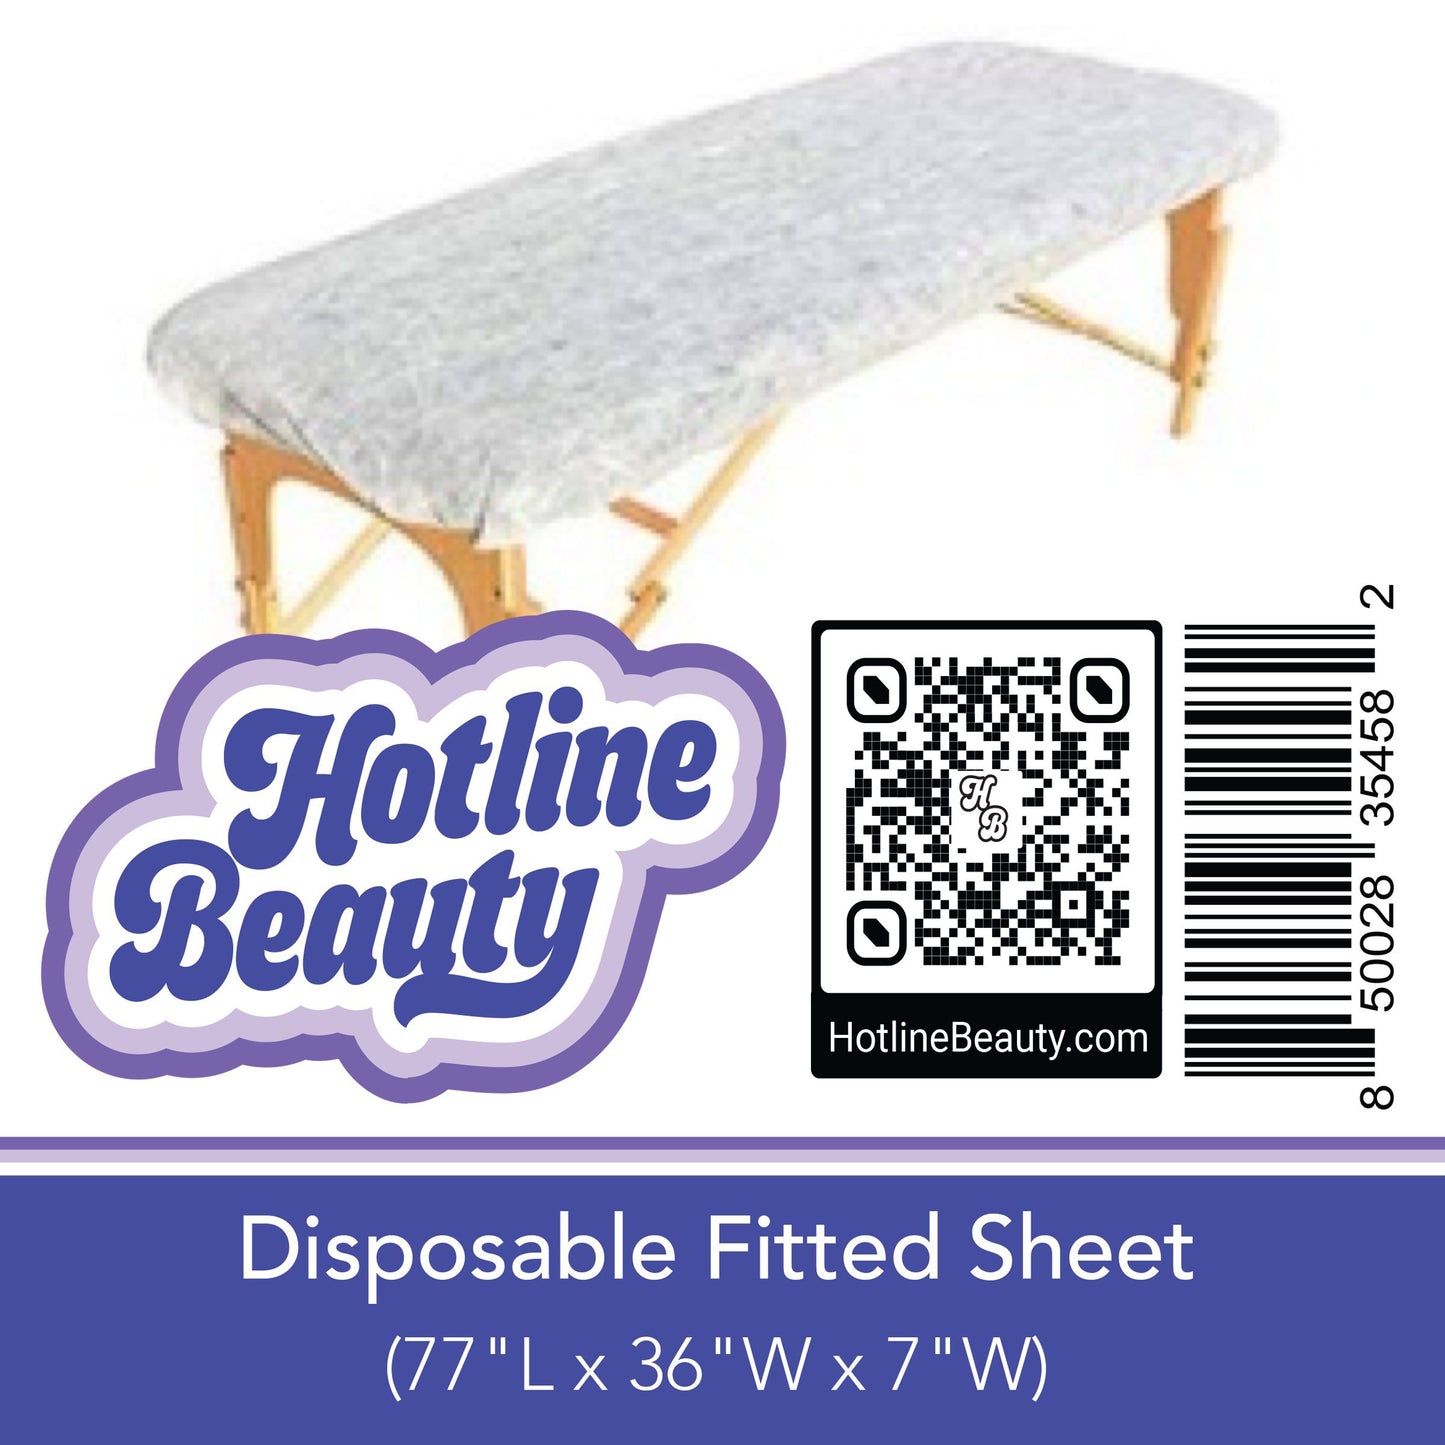 Disposable Fitted Sheet | 77"L x 36"W x 7"W | 10 Pack SPA HOTLINE BEAUTY 